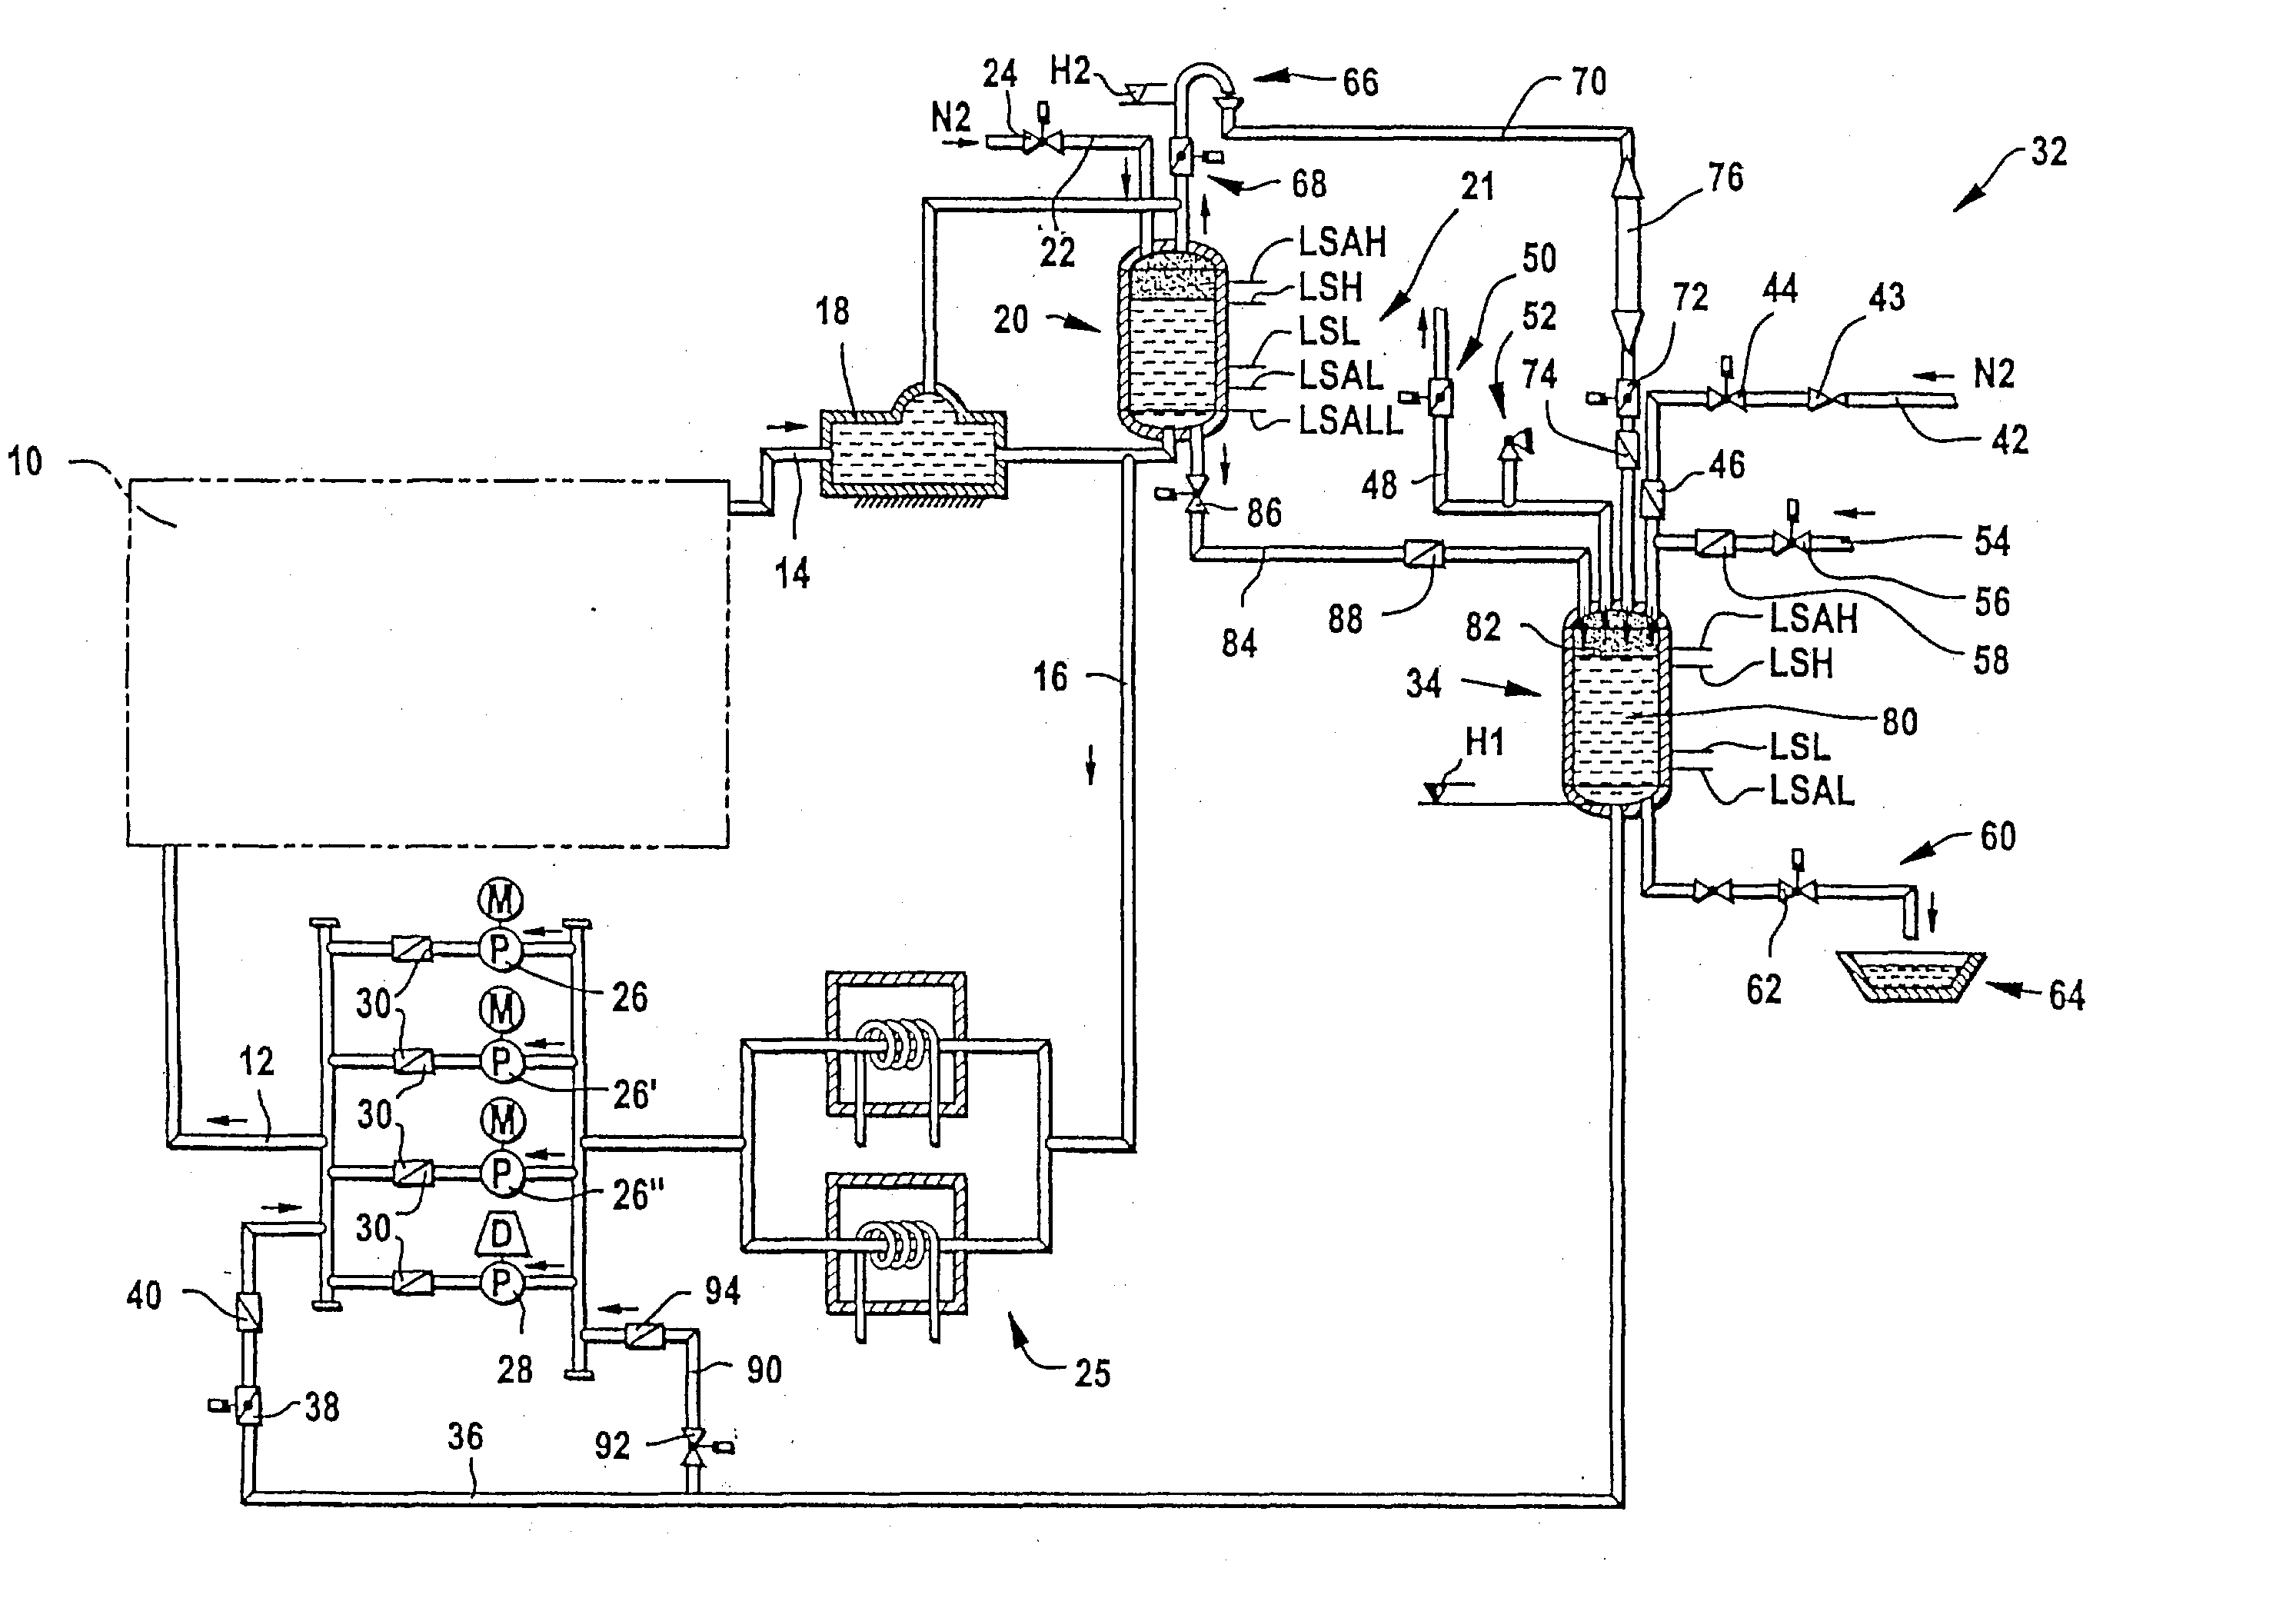 Cooling system for a metallurgical furnace